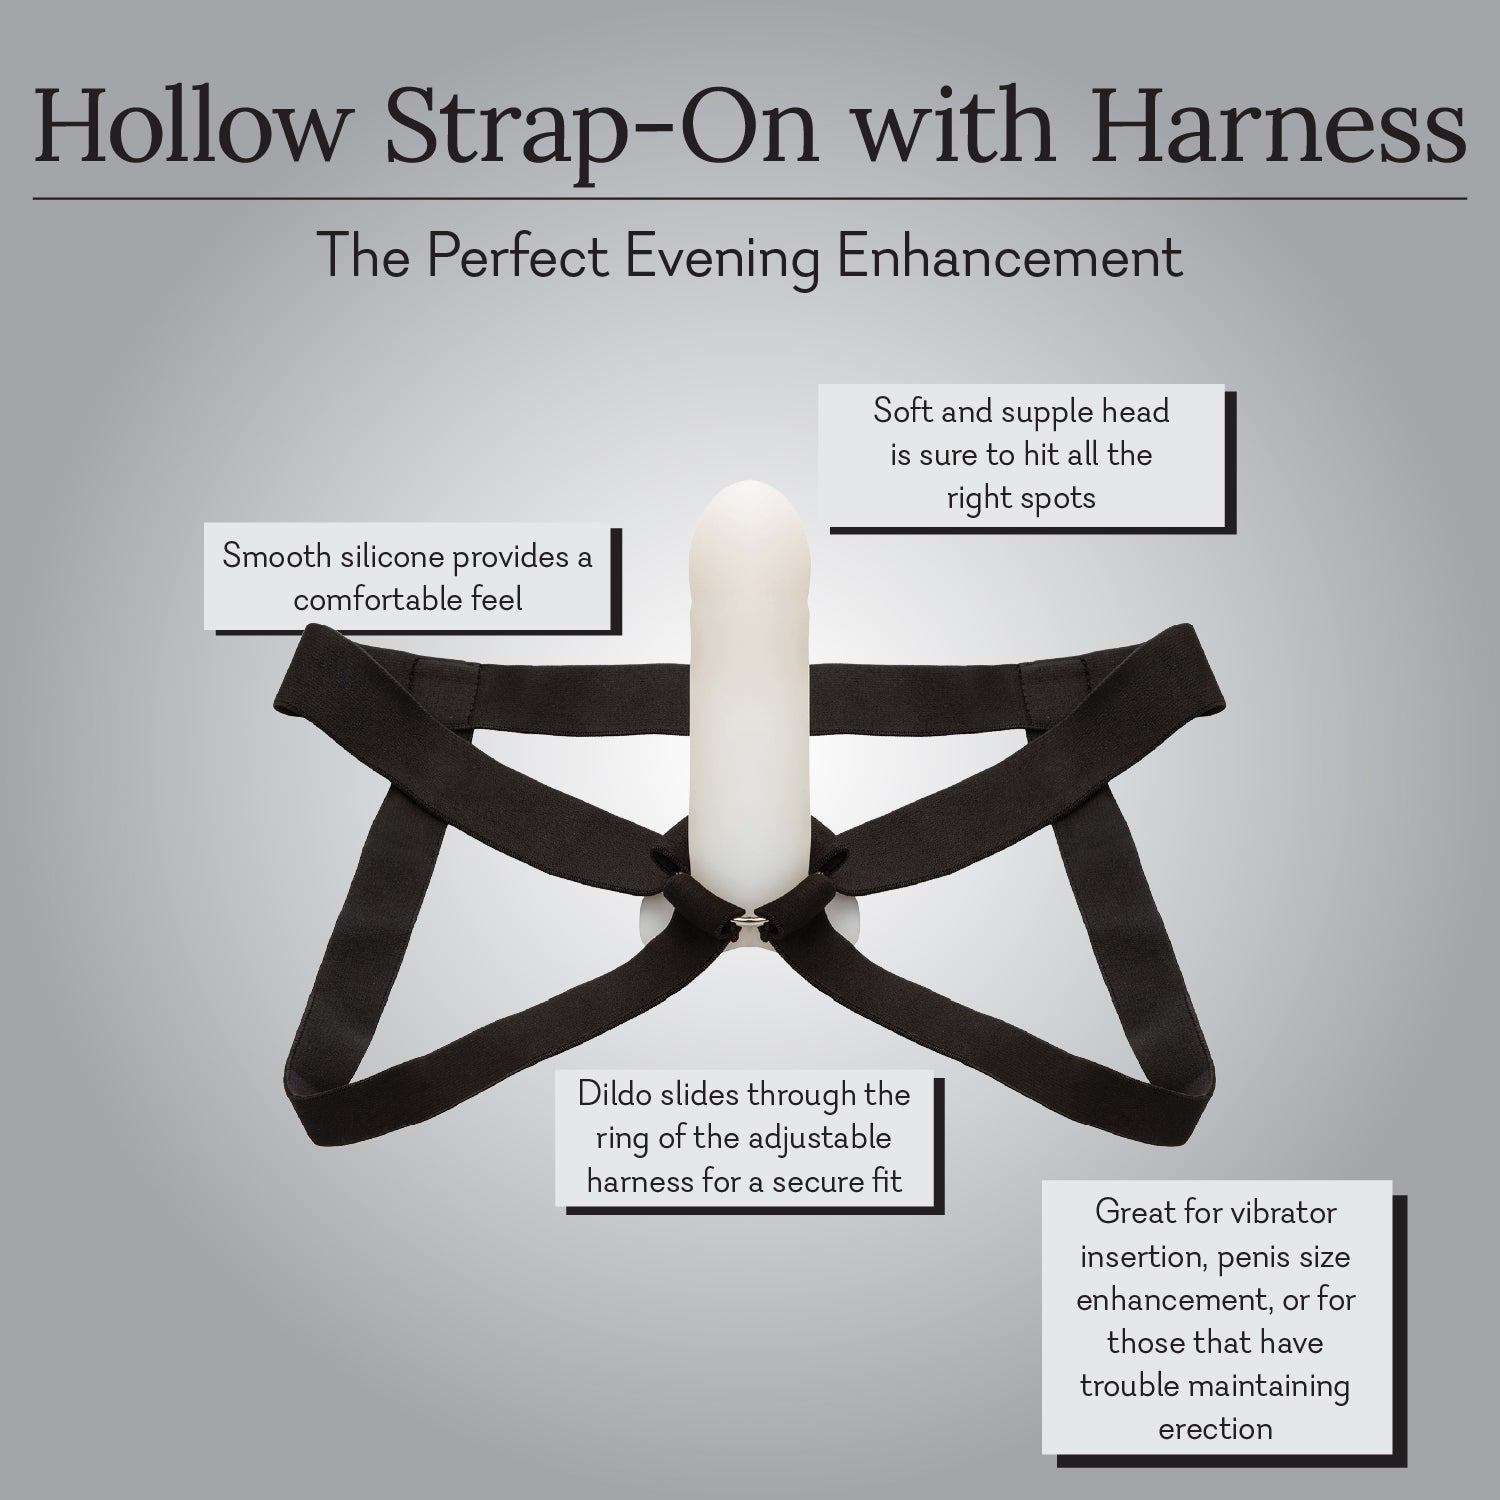 Hollow Strap-On with Harness Infographic Pure Romance